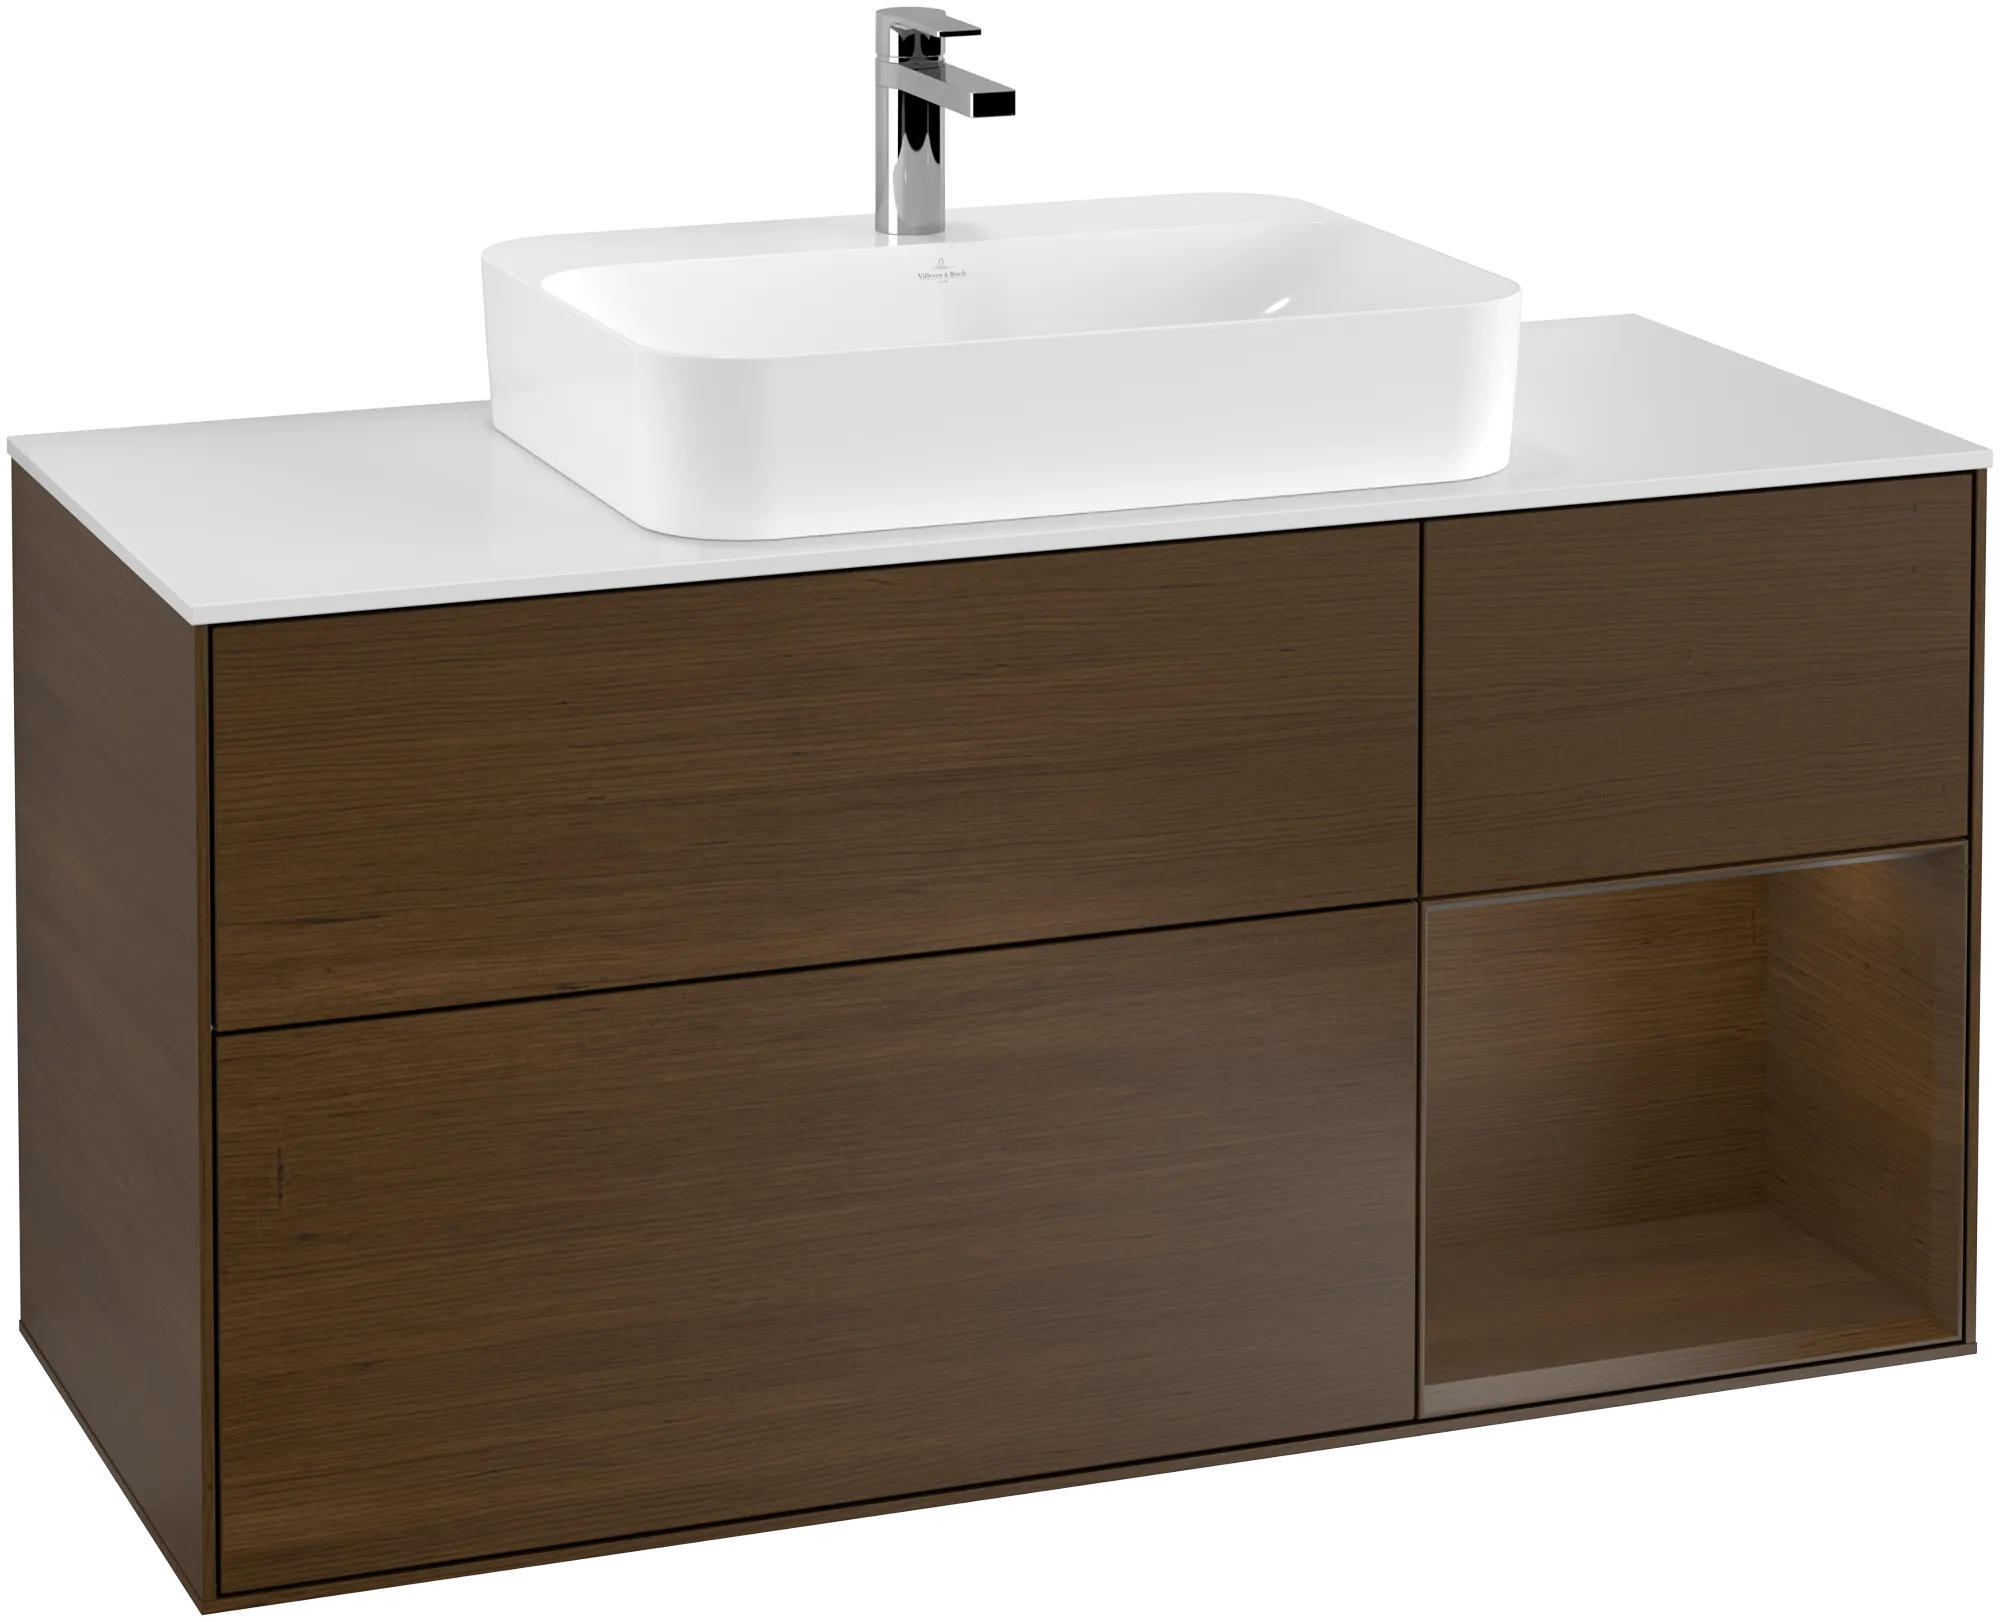 Picture of VILLEROY BOCH Finion Vanity unit, with lighting, 3 pull-out compartments, 1200 x 603 x 501 mm, Walnut Veneer / Walnut Veneer / Glass White Matt #G421GNGN